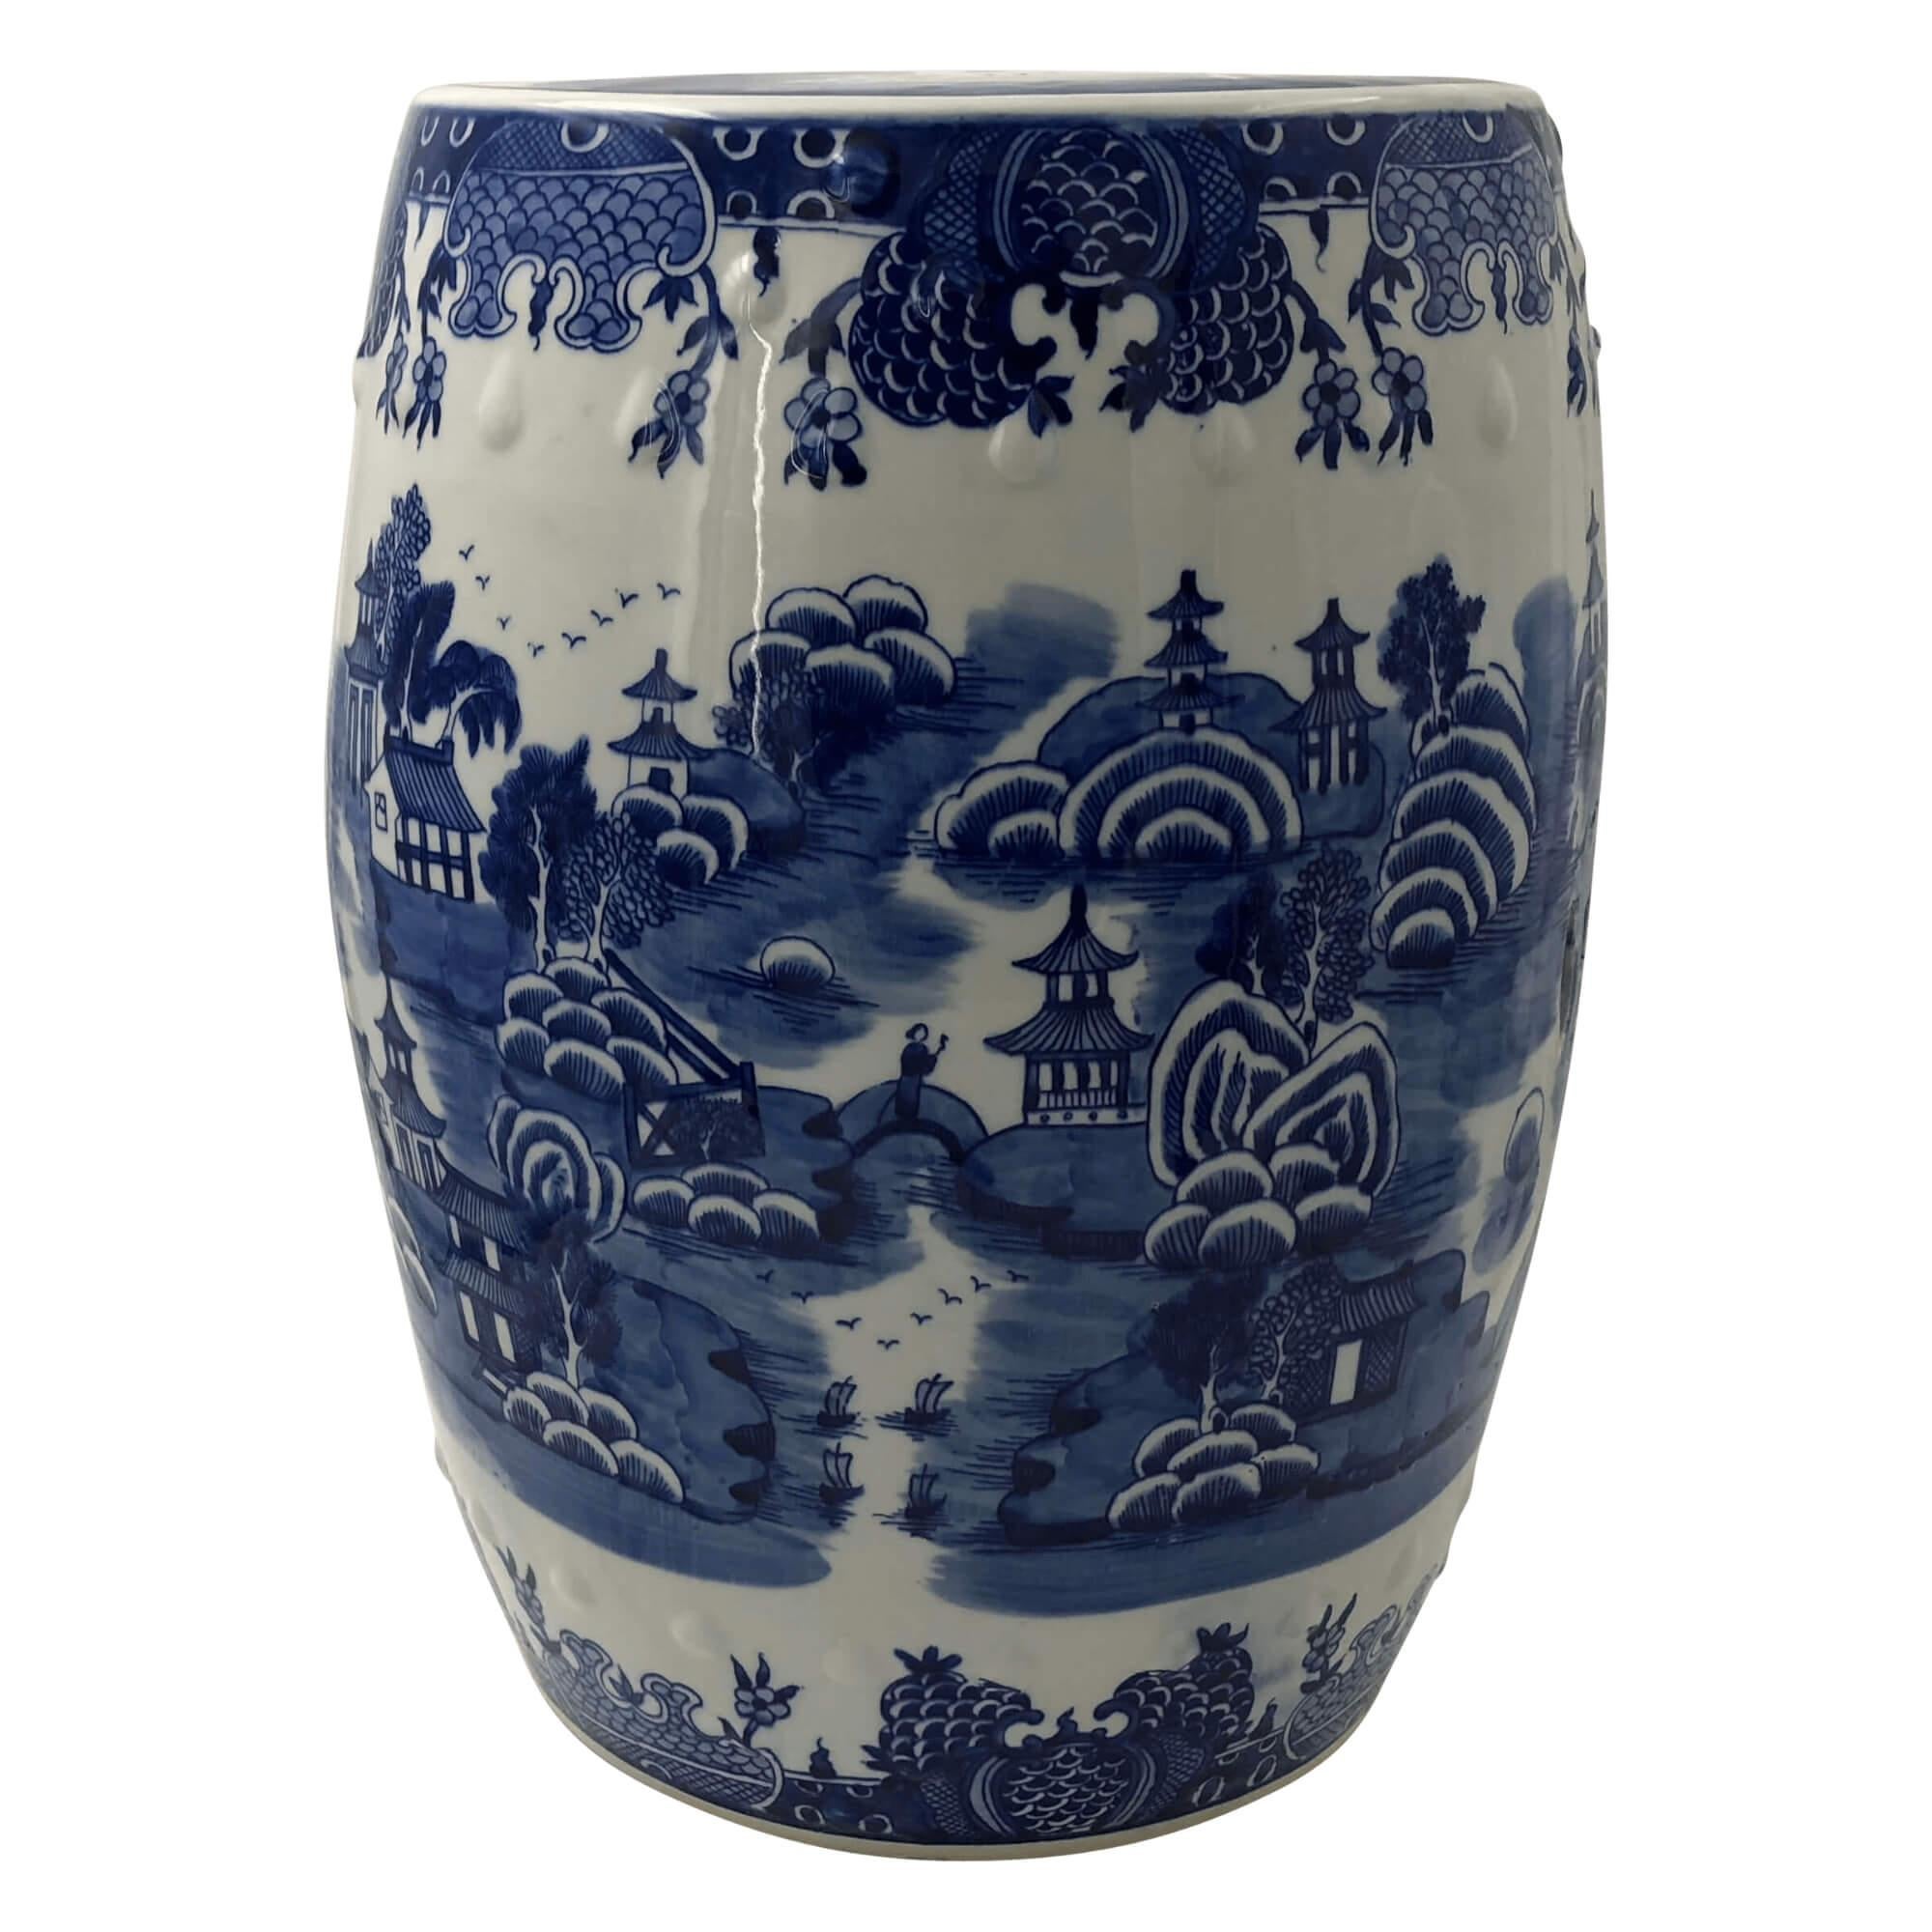 A very nice Chinese blue and white hand-painted ceramic garden stool decorated with traditional Chinese water town scenes.

Dimensions: 13.5